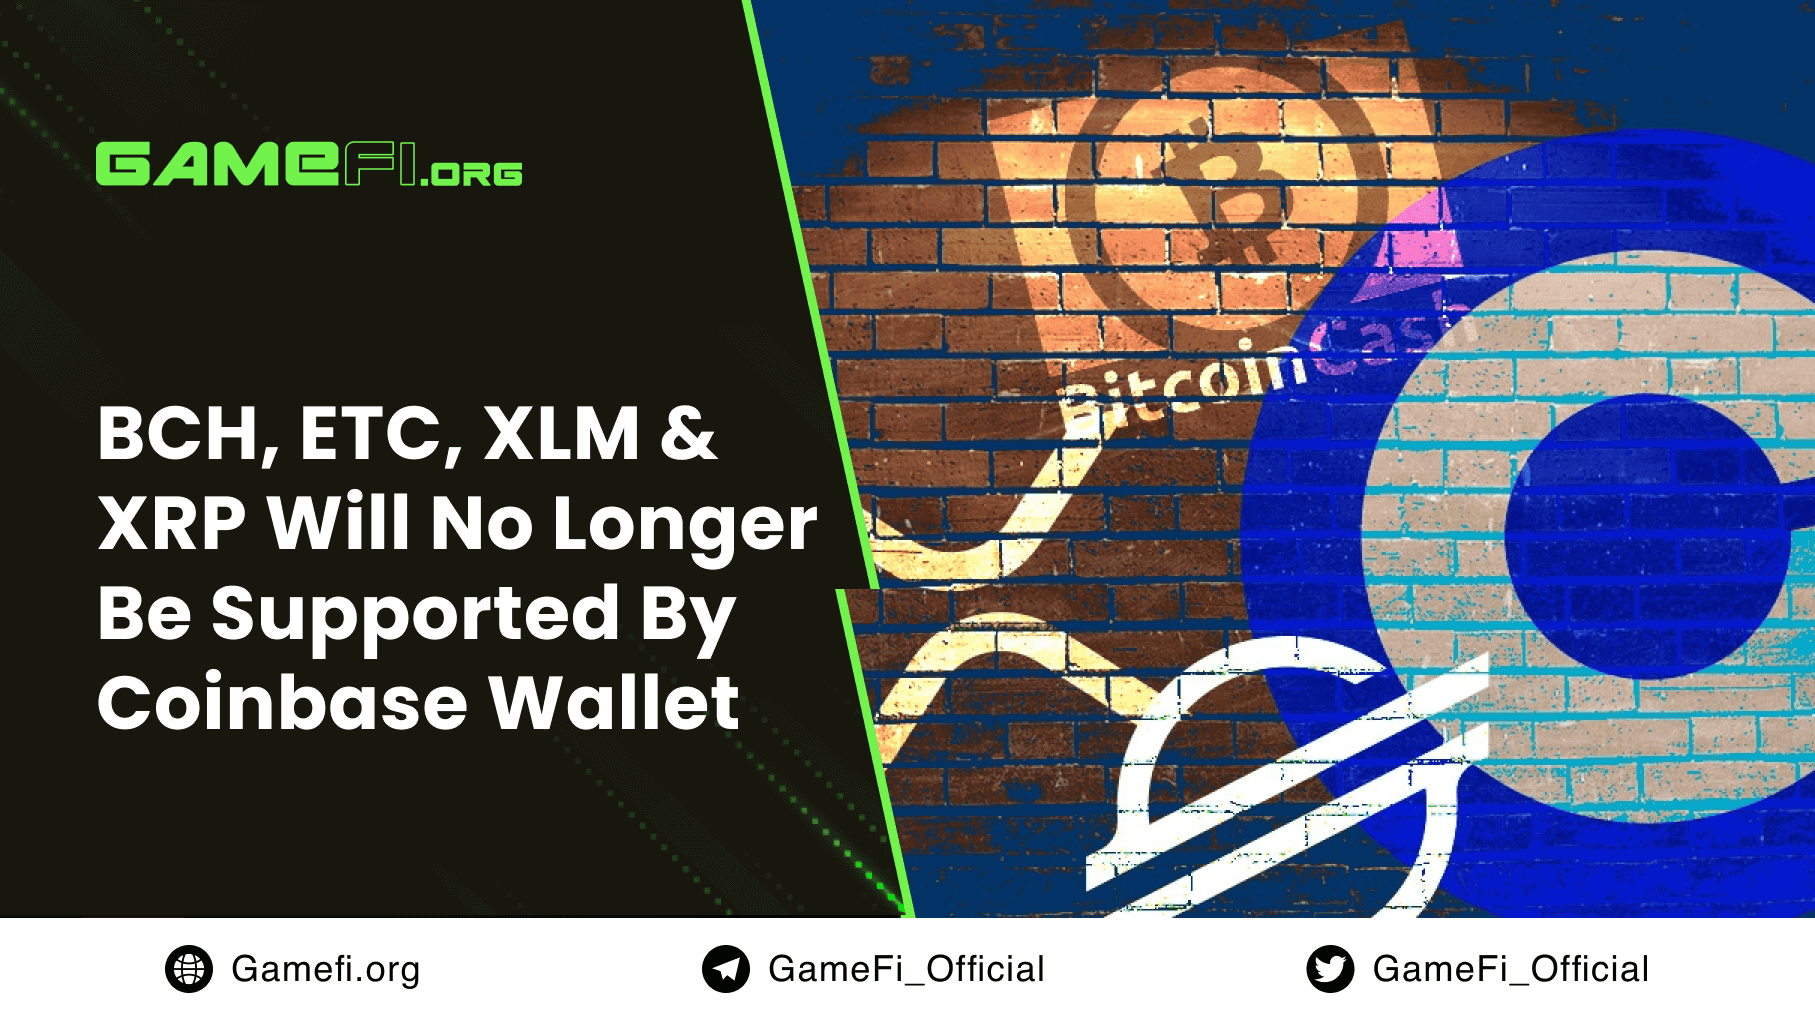 BCH, ETC, XLM & XRP Will No Longer Be Supported By Coinbase Wallet